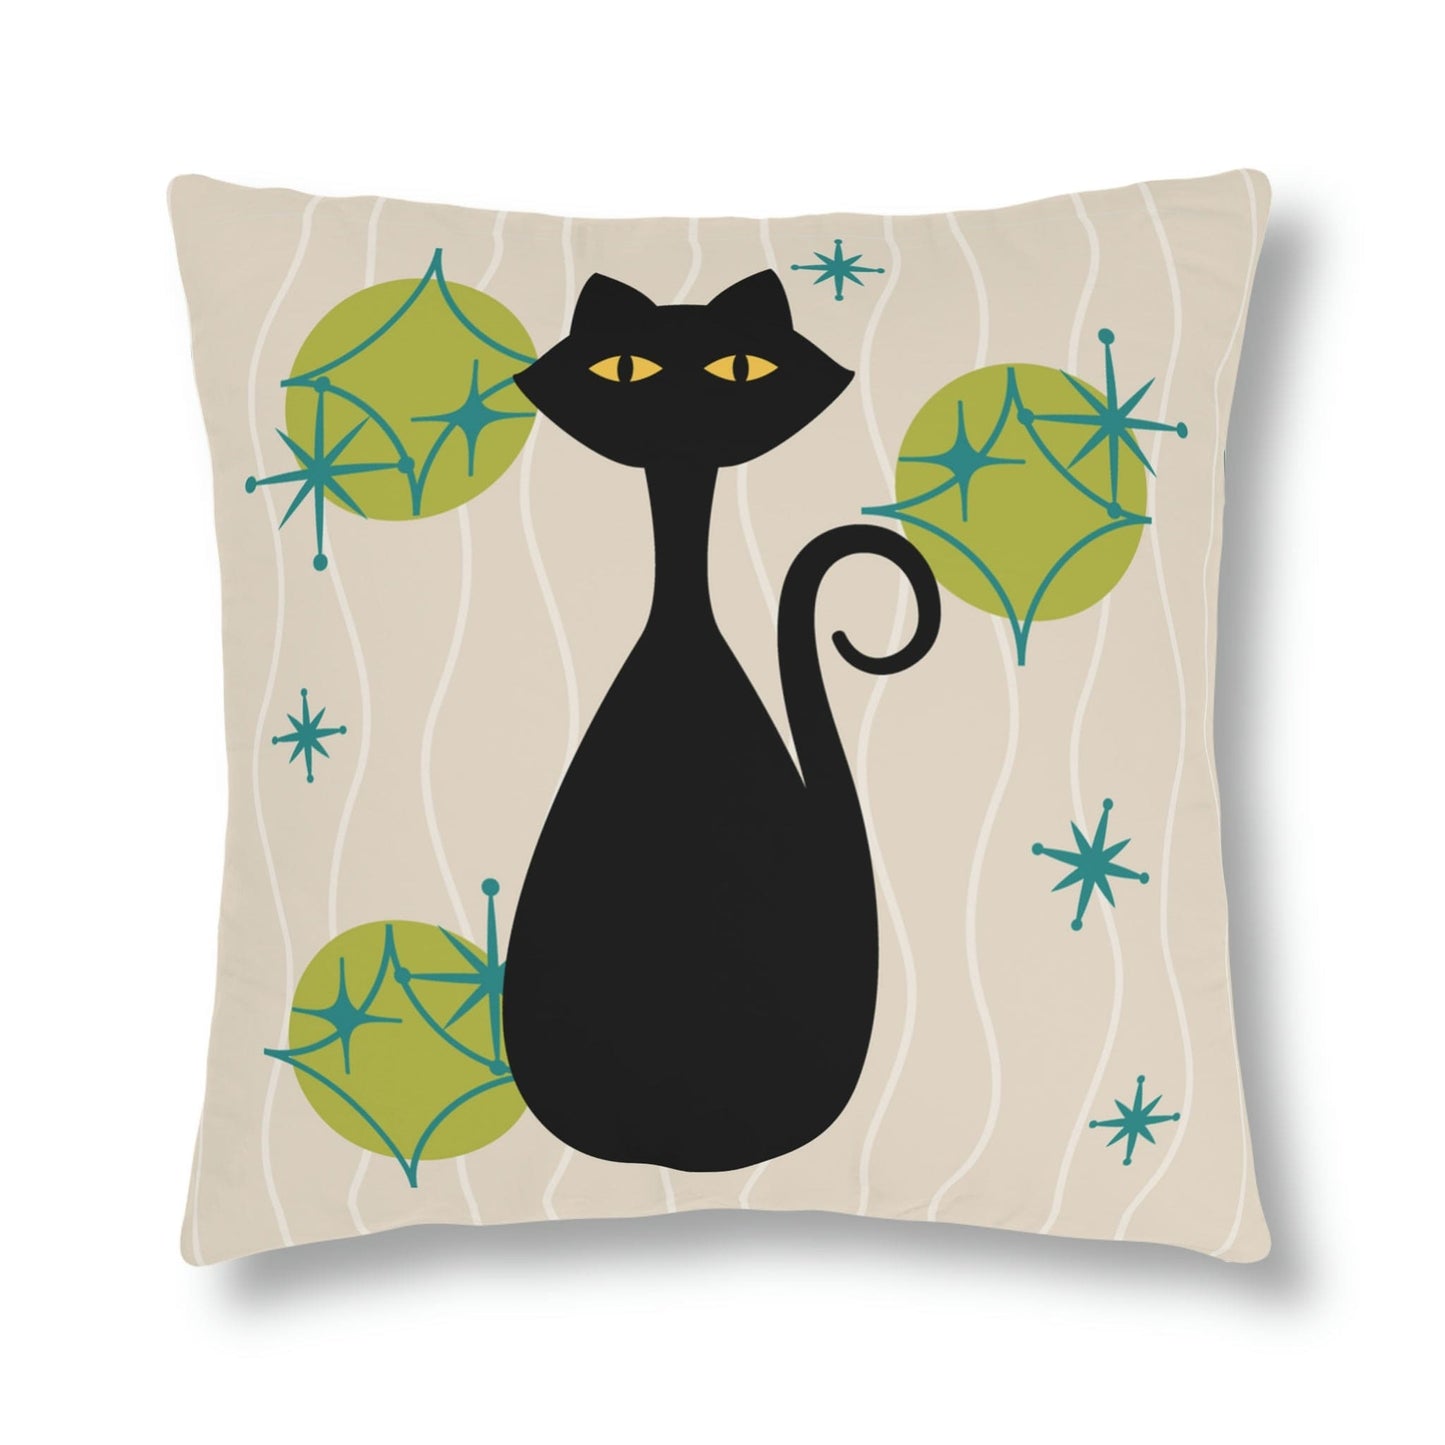 Kate McEnroe New York Outdoor Pillow in Retro 1950s Atomic Cat Print Outdoor Pillows 20" × 20" / Square 14259166027390781657